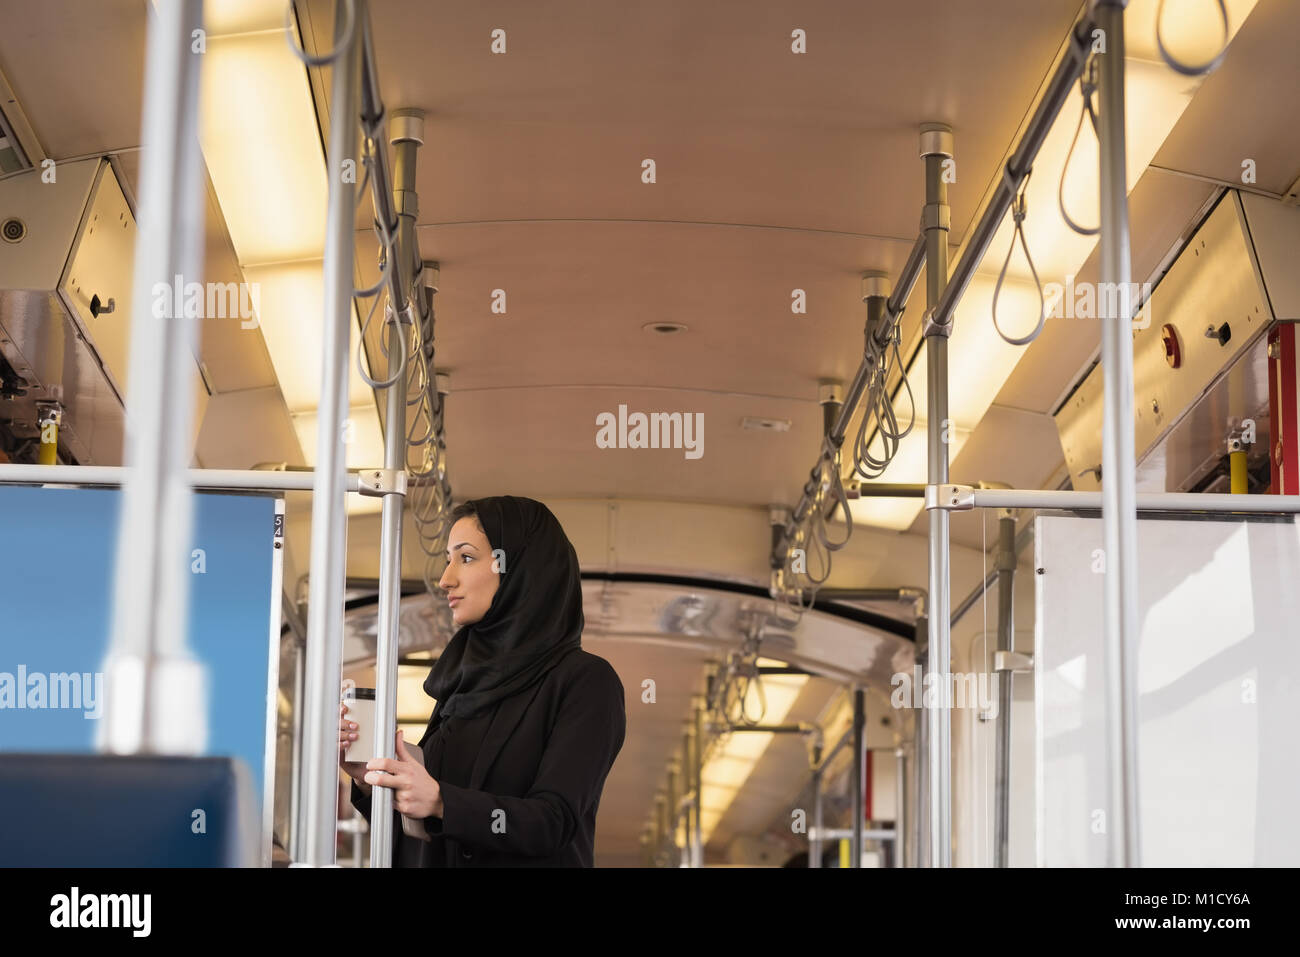 Woman in hijab travelling in train Stock Photo